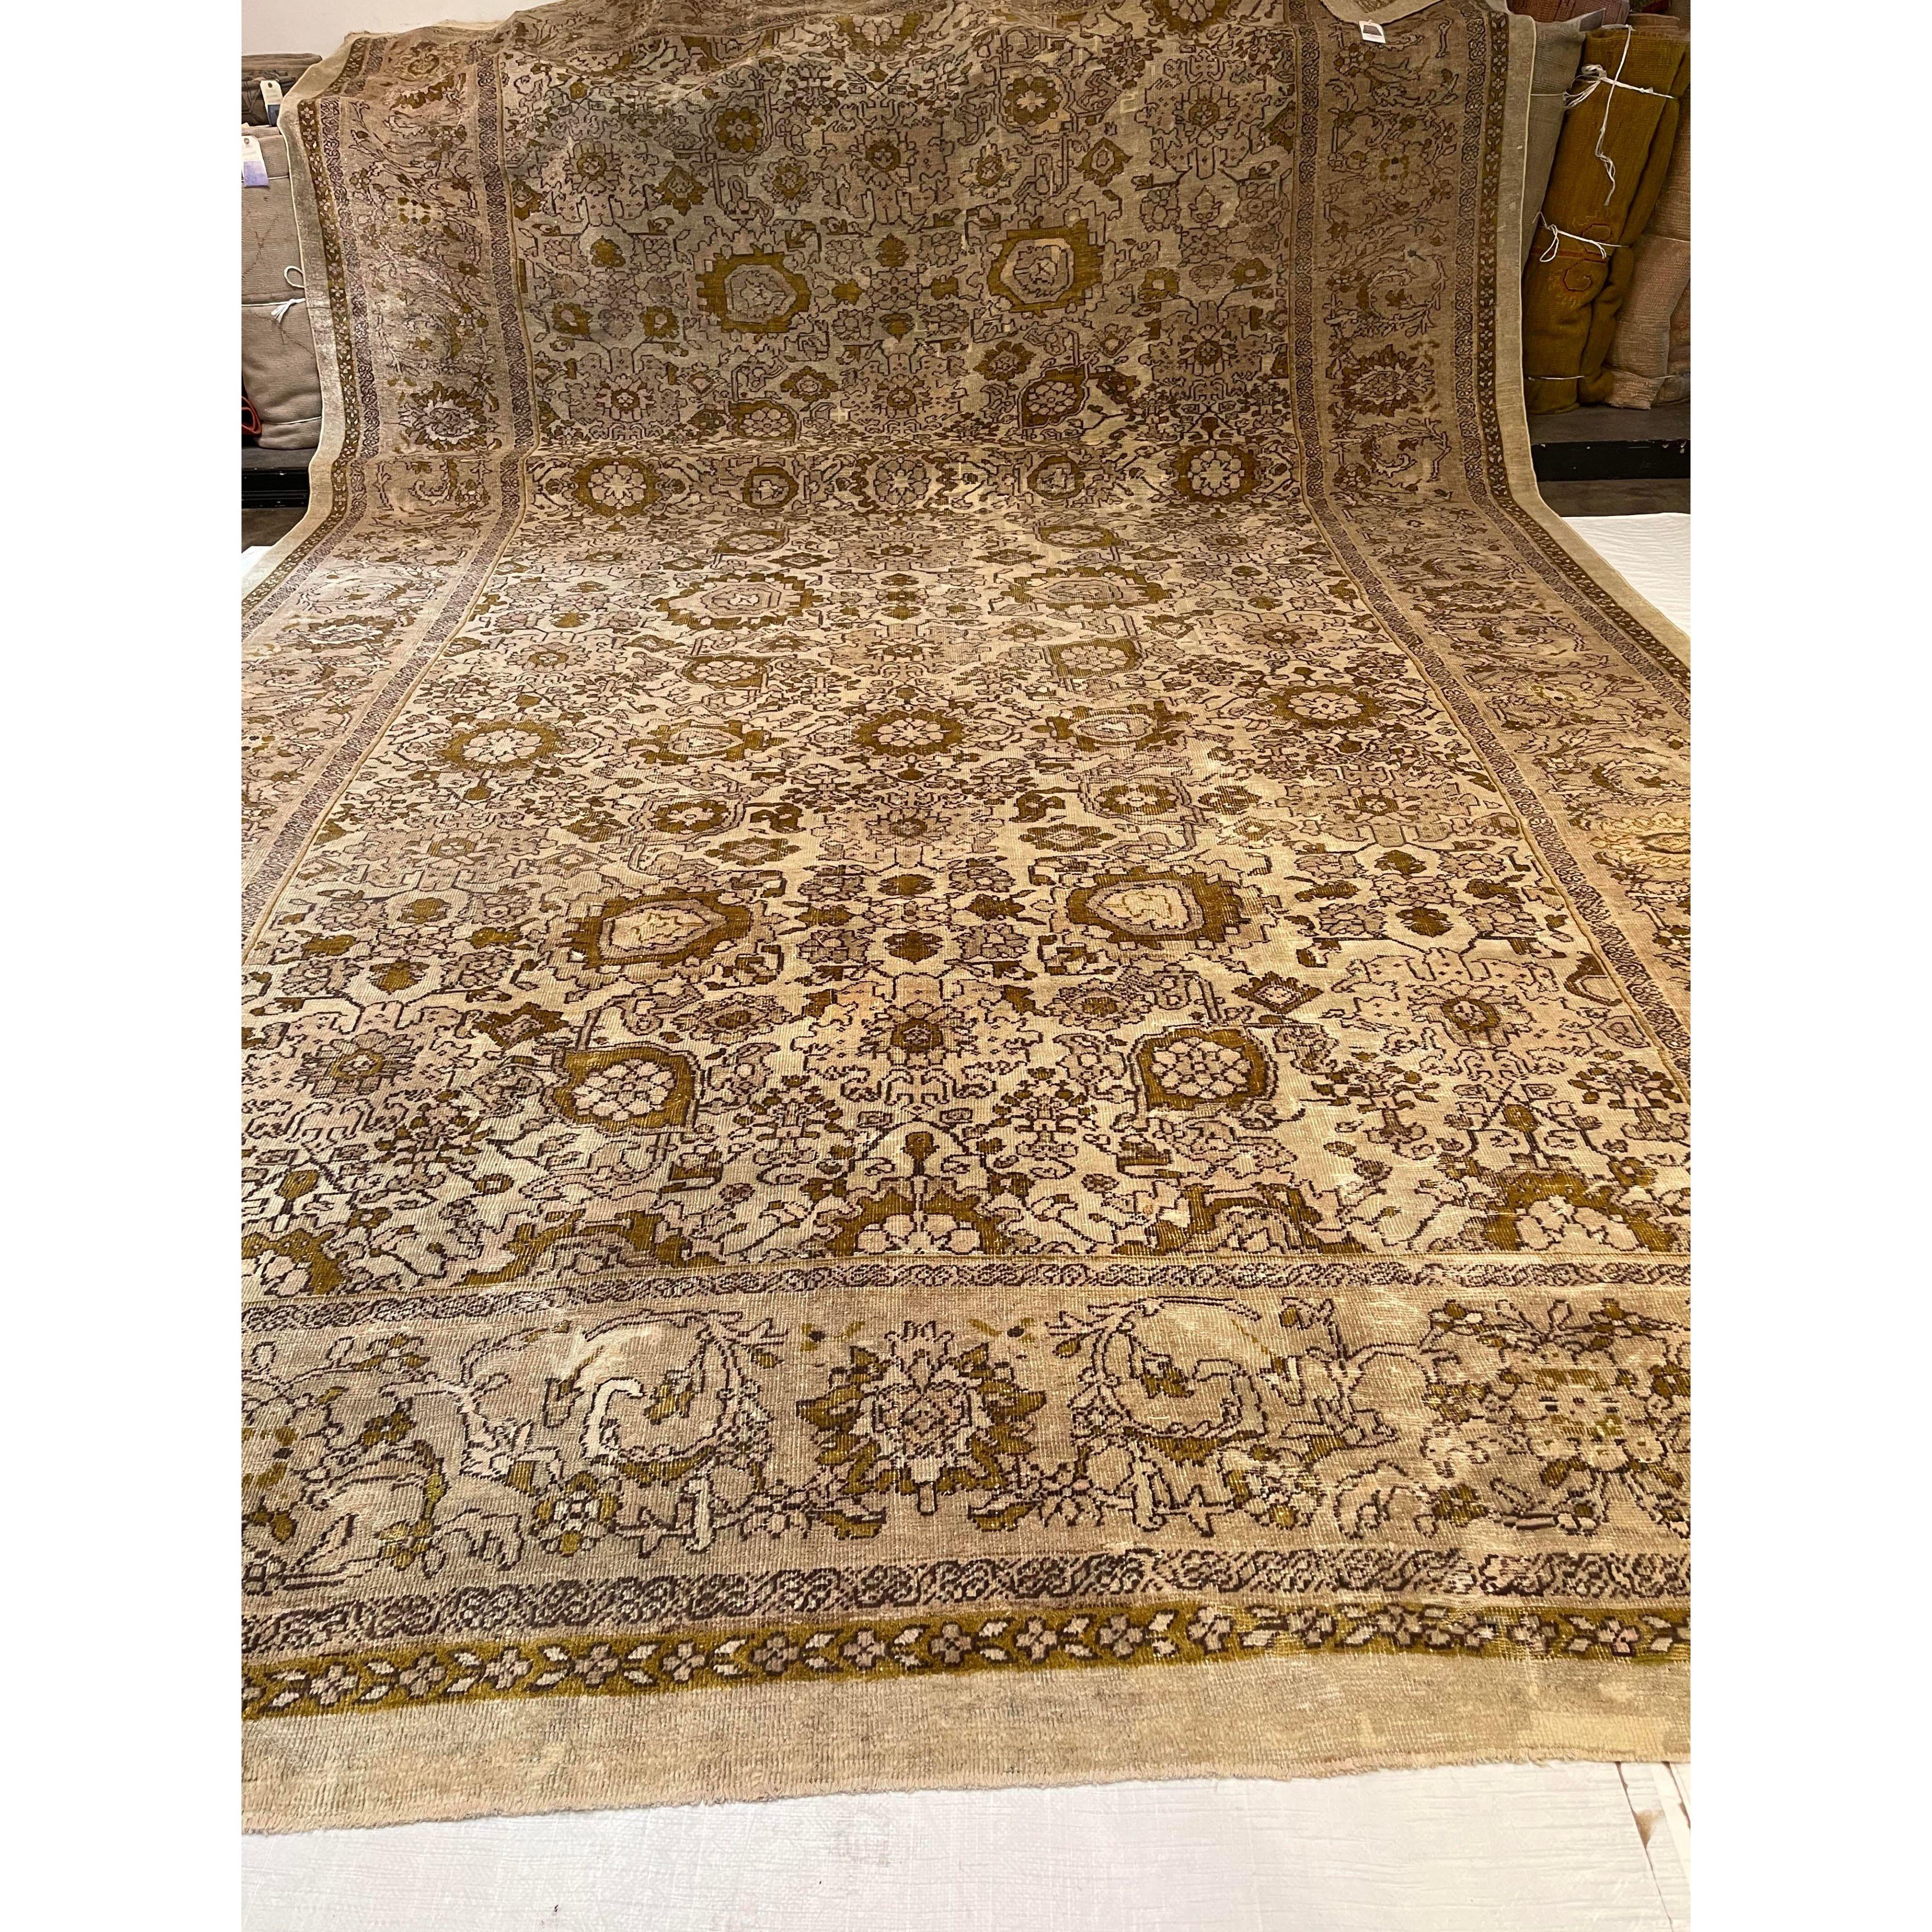 Antique Sultanabad Rugs The city of Sultanabad (which is now known as Arak) was founded, in the early 1800’s, as a center for commercial rug production in Iran. During the late 19th century, the firm of Hotz and Son and Ziegler and Co. established a